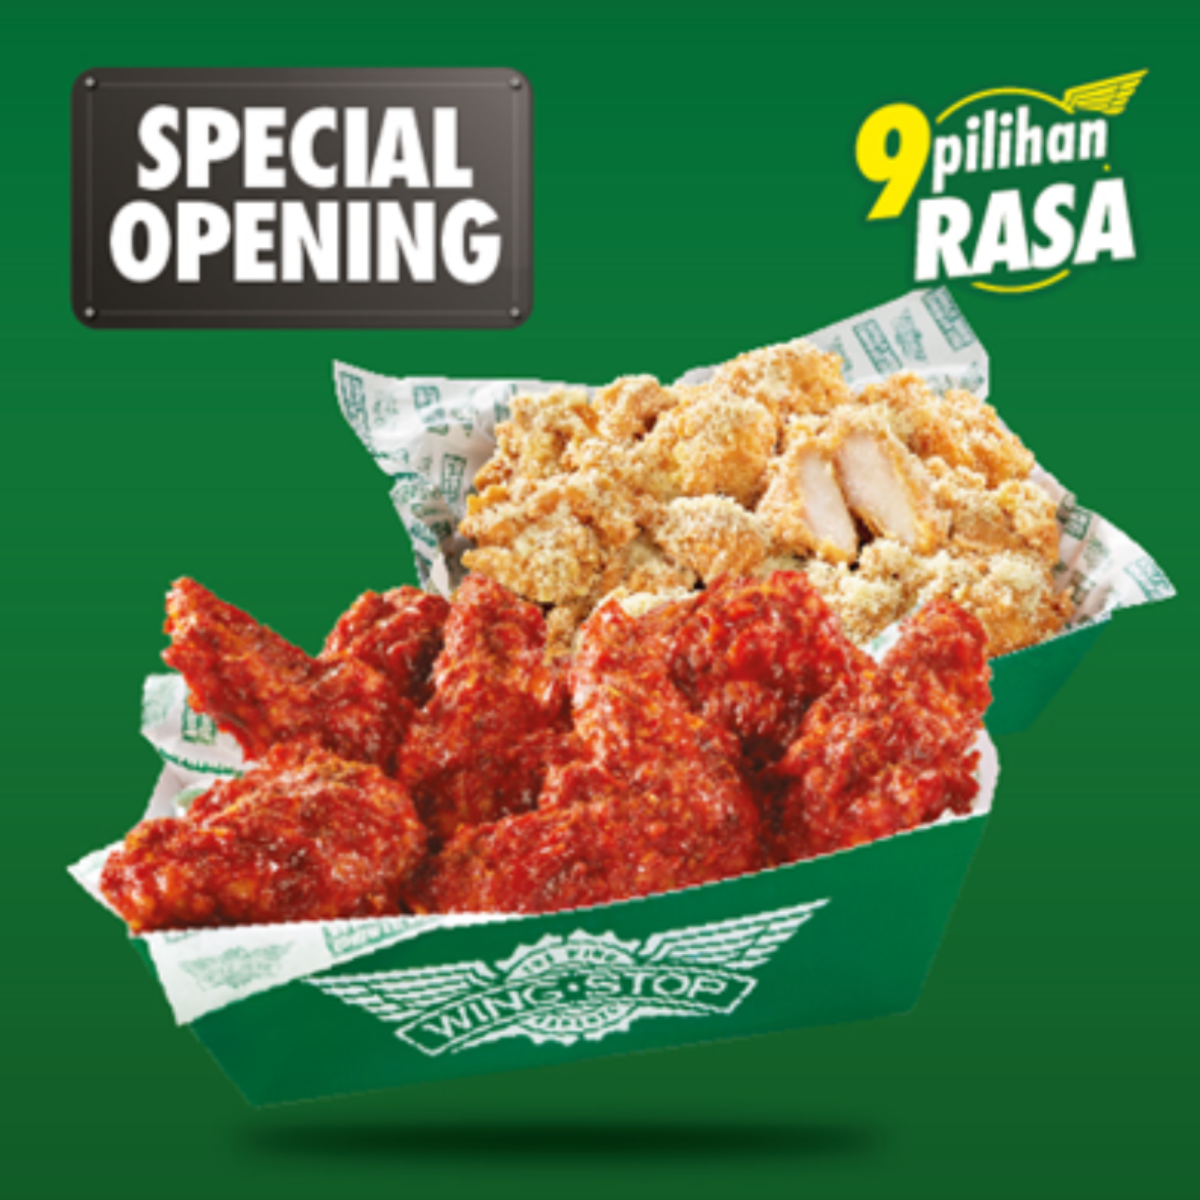 Promo Wingstop Special Opening Summarecon Mall Bandung  Official/Wingstop.id